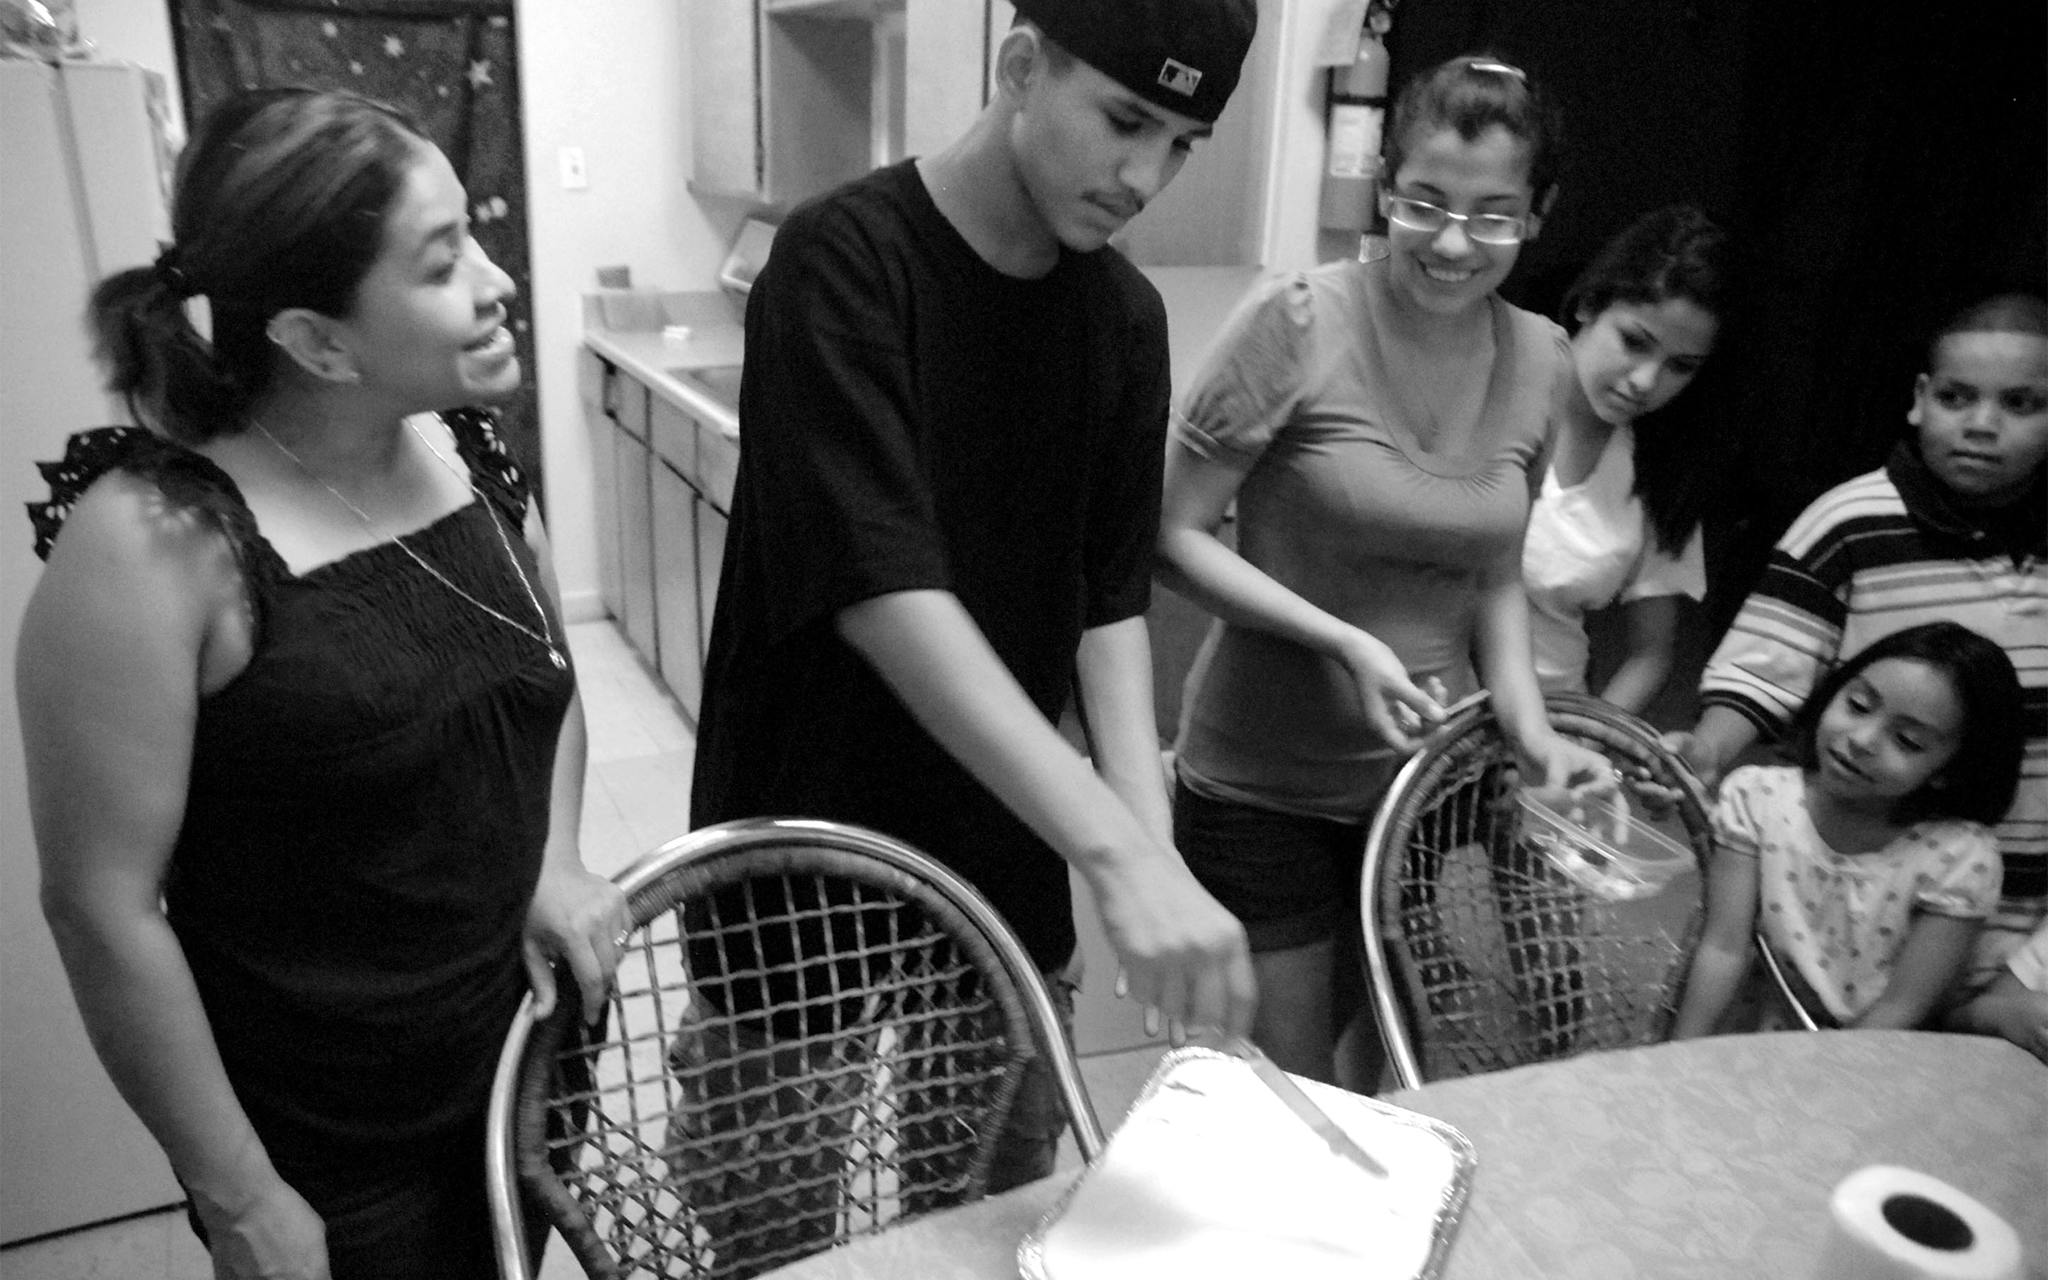 Christian cuts his own birthday cake, a tres leches, as his mother Maricela, left, sister Arleen, right, girlfriend Alexia Aleman, third from right, an unidentified person, second from right, and friend Miguel “Junior” Umanzor Jr. watch in their apartment at Booker T. on July 16, 2009. Christian was celebrating his fourteenth birthday, which would be his last.